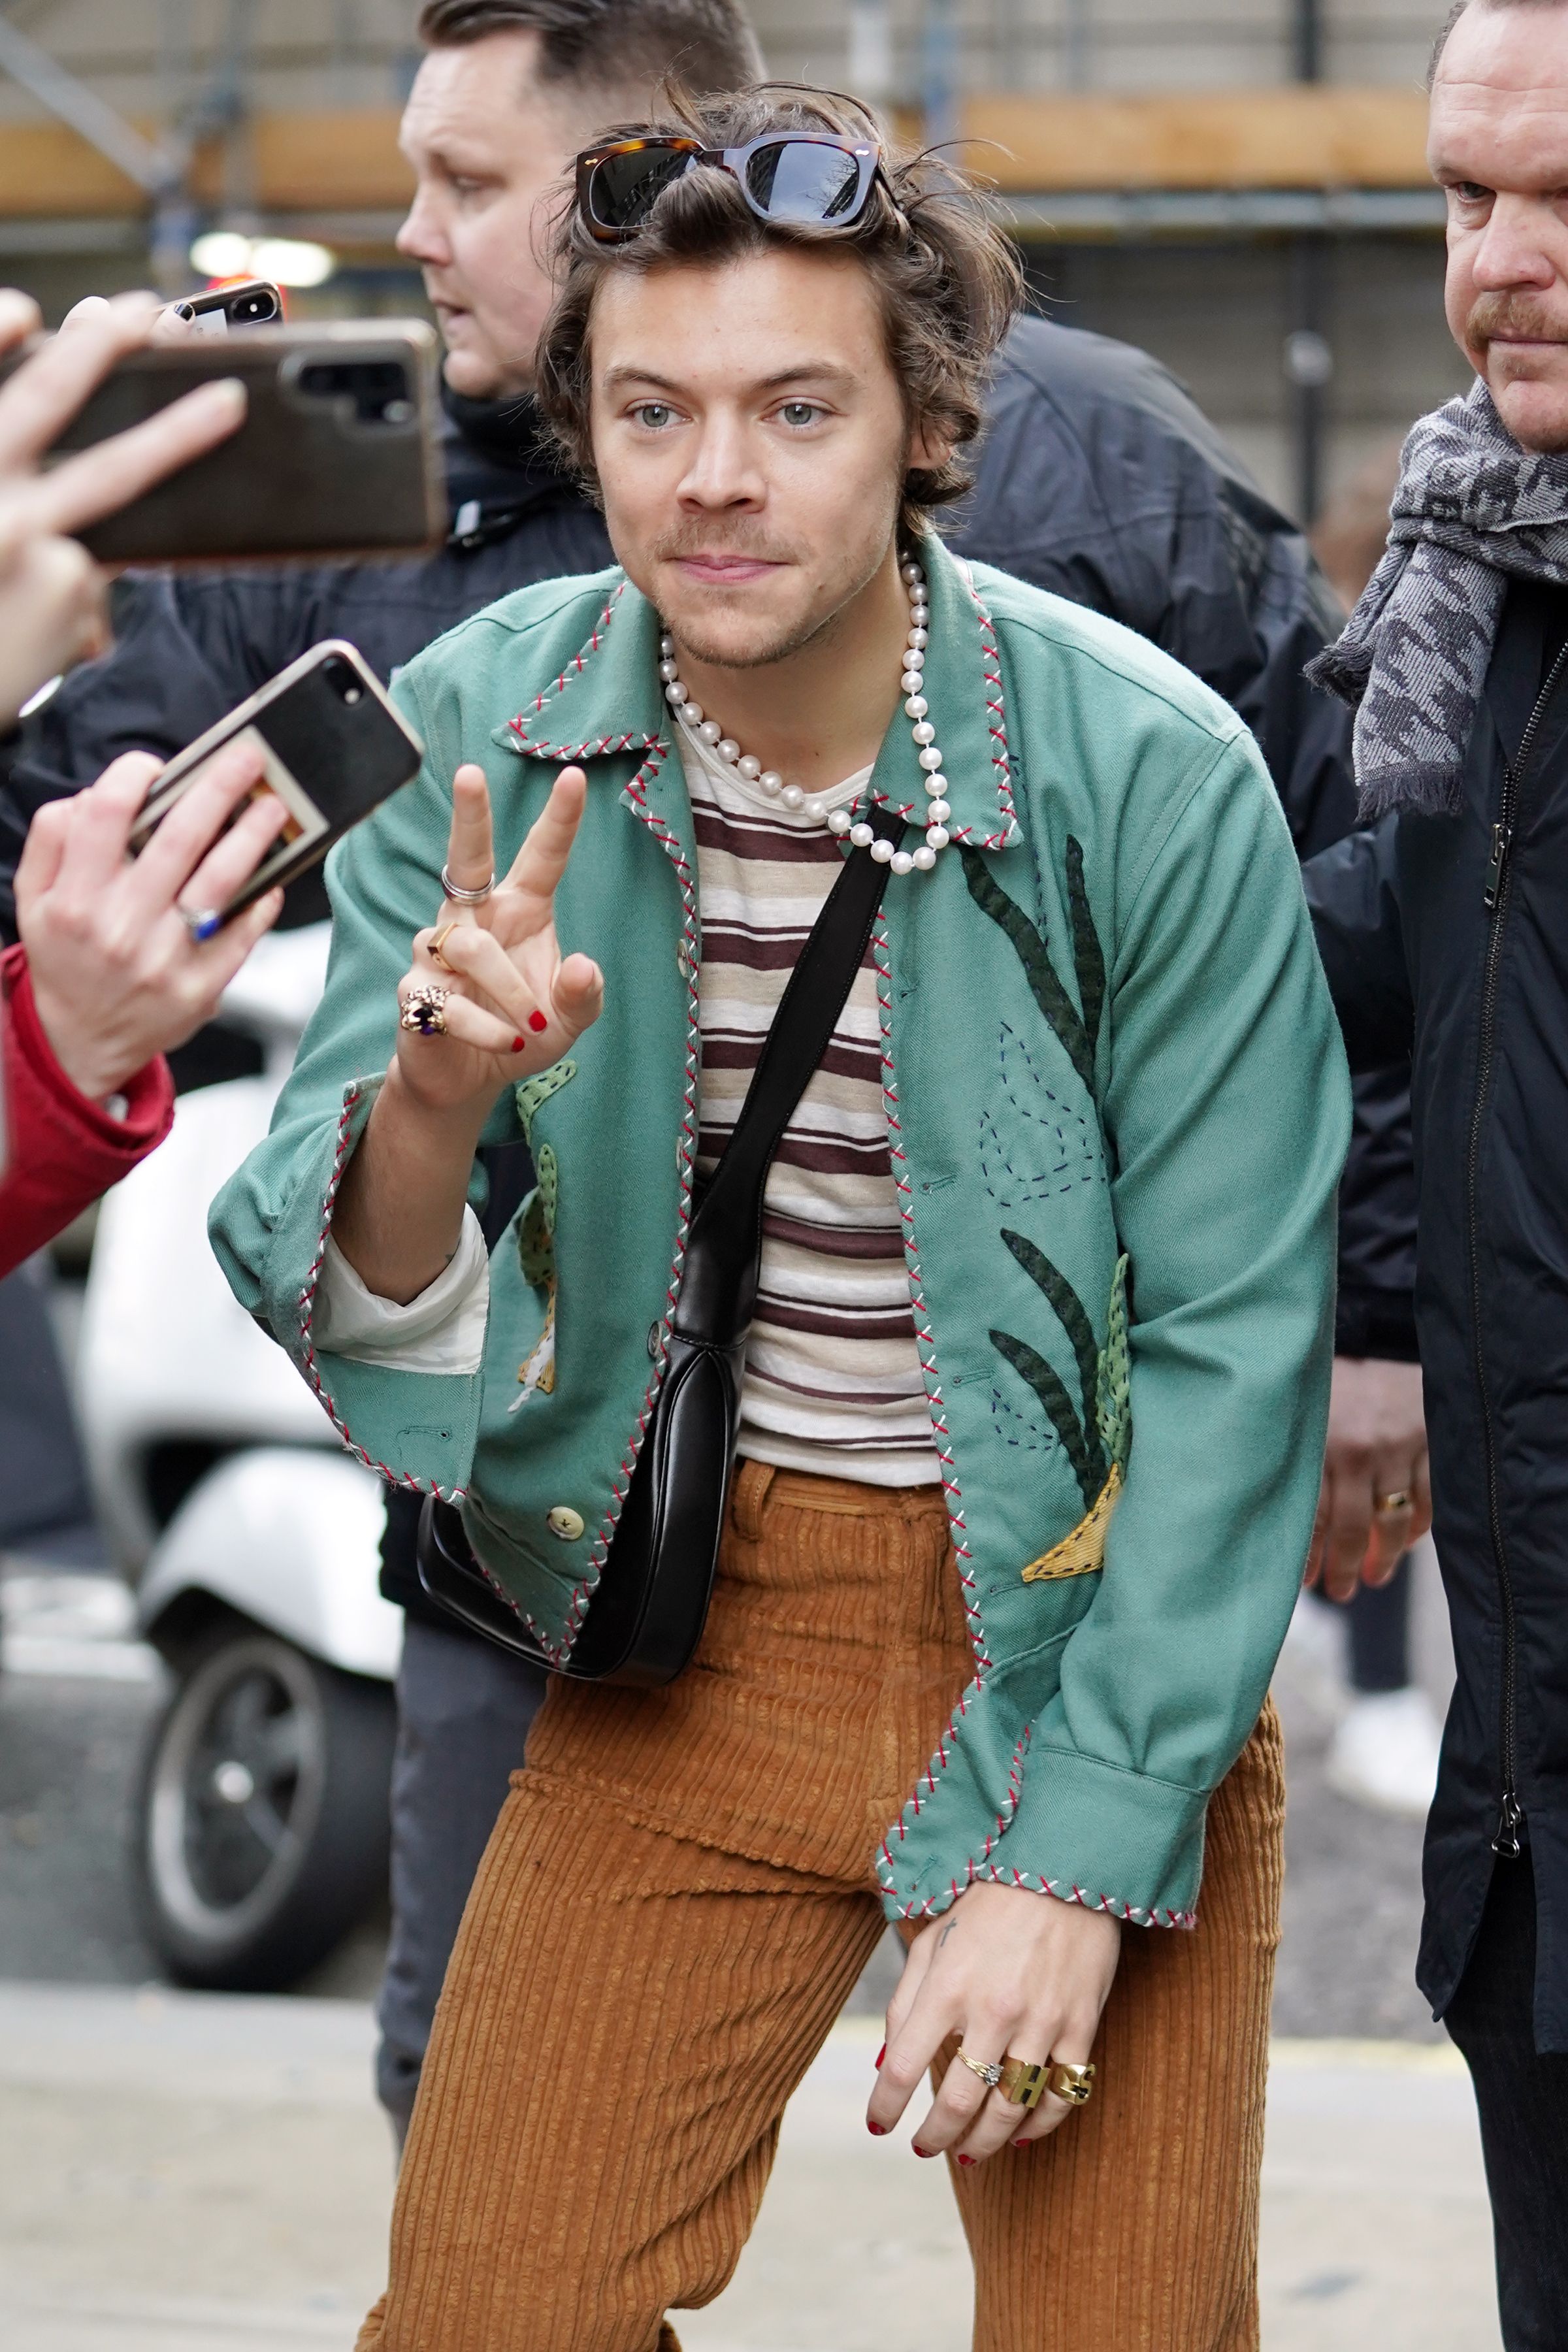 Harry Styles: Fashion Story in Photos